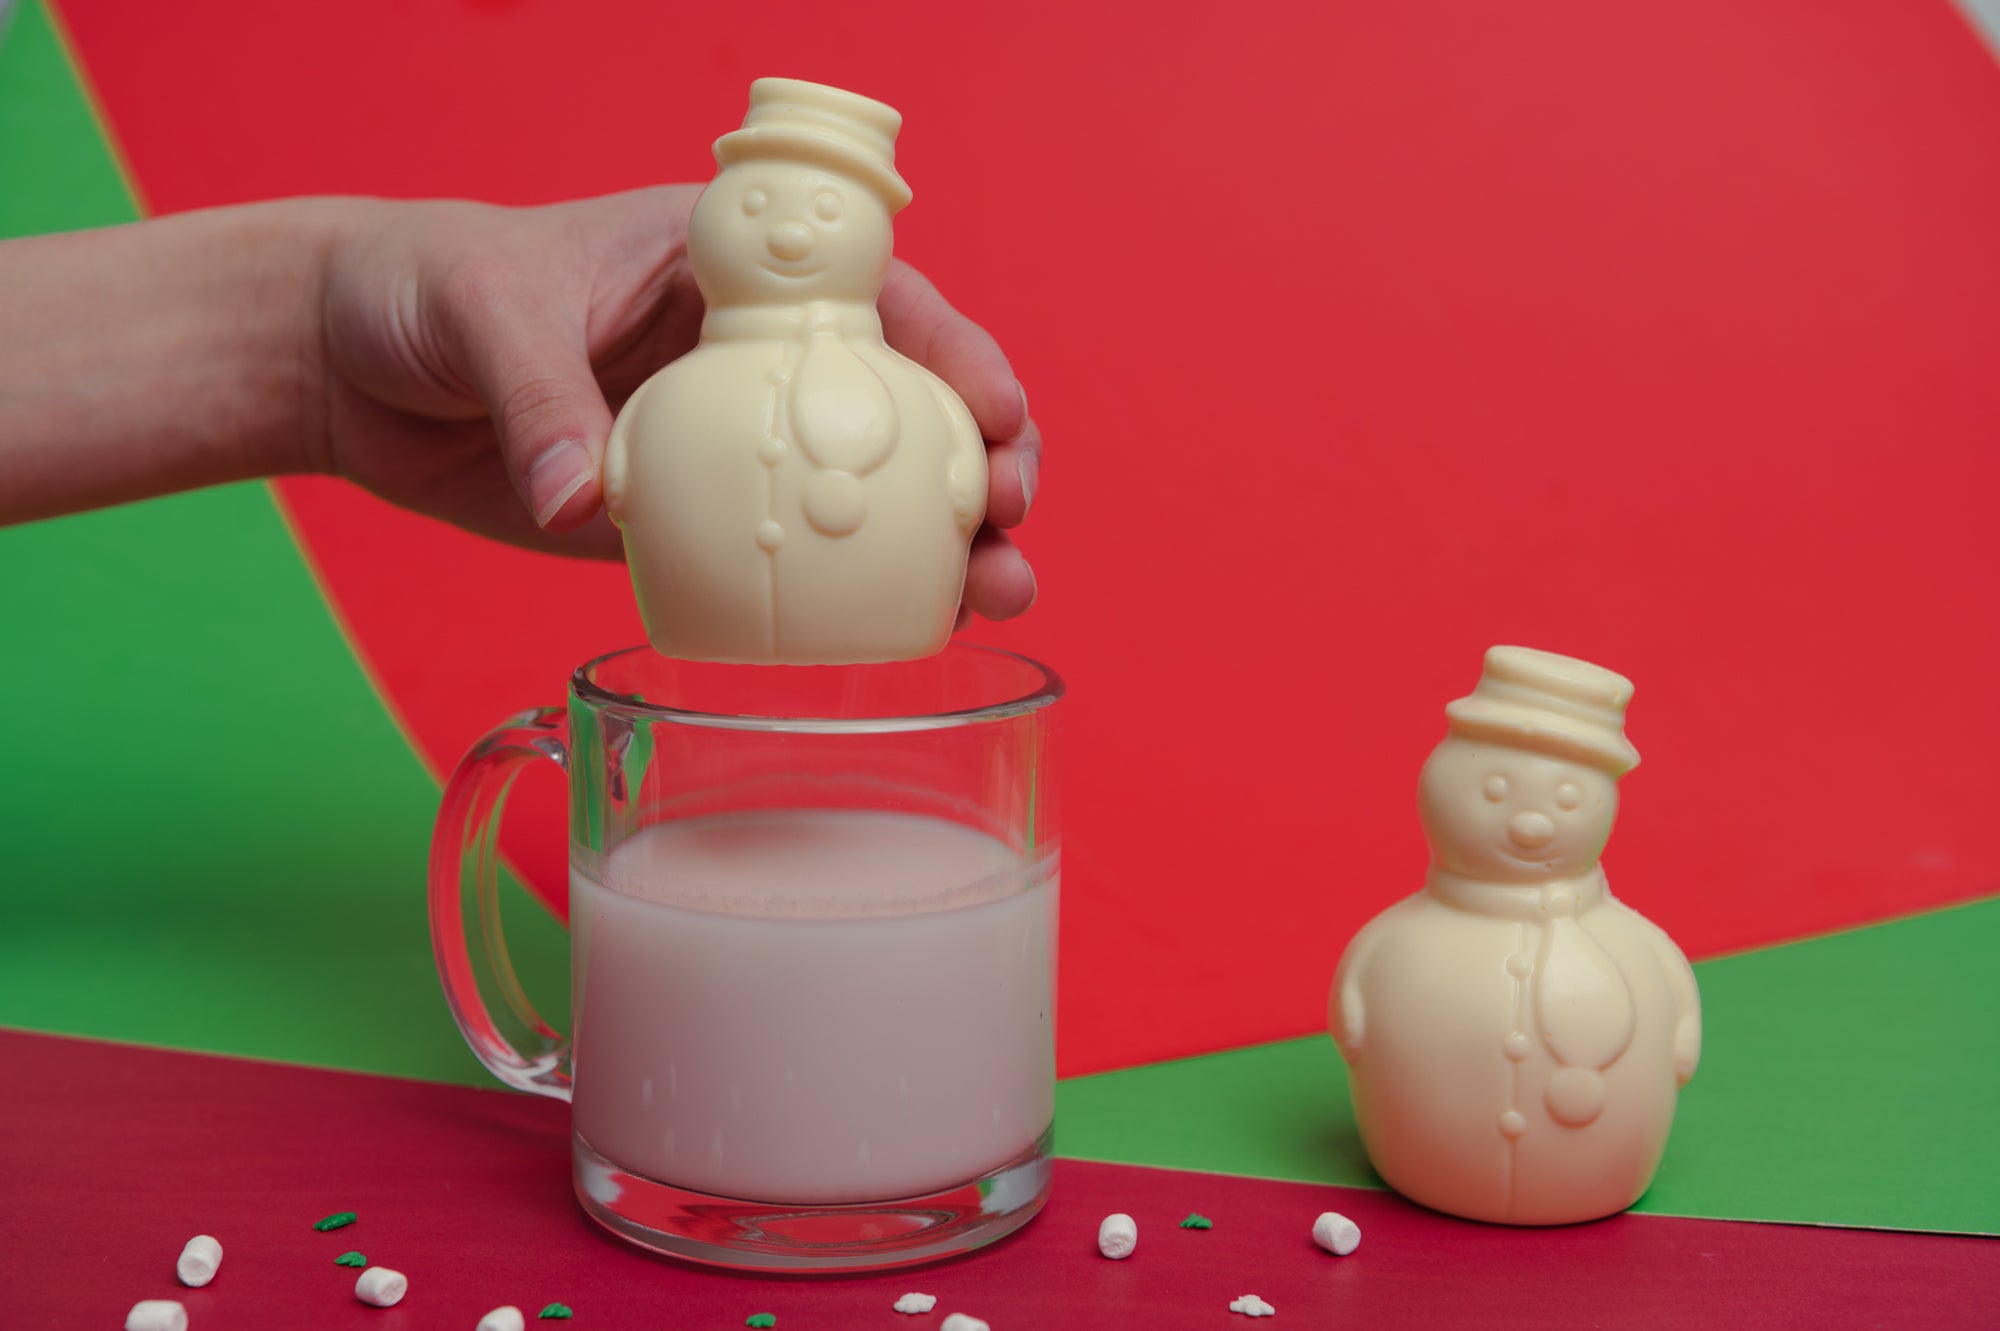 1 Pack Snowman White Chocolate Cocoa Bomb